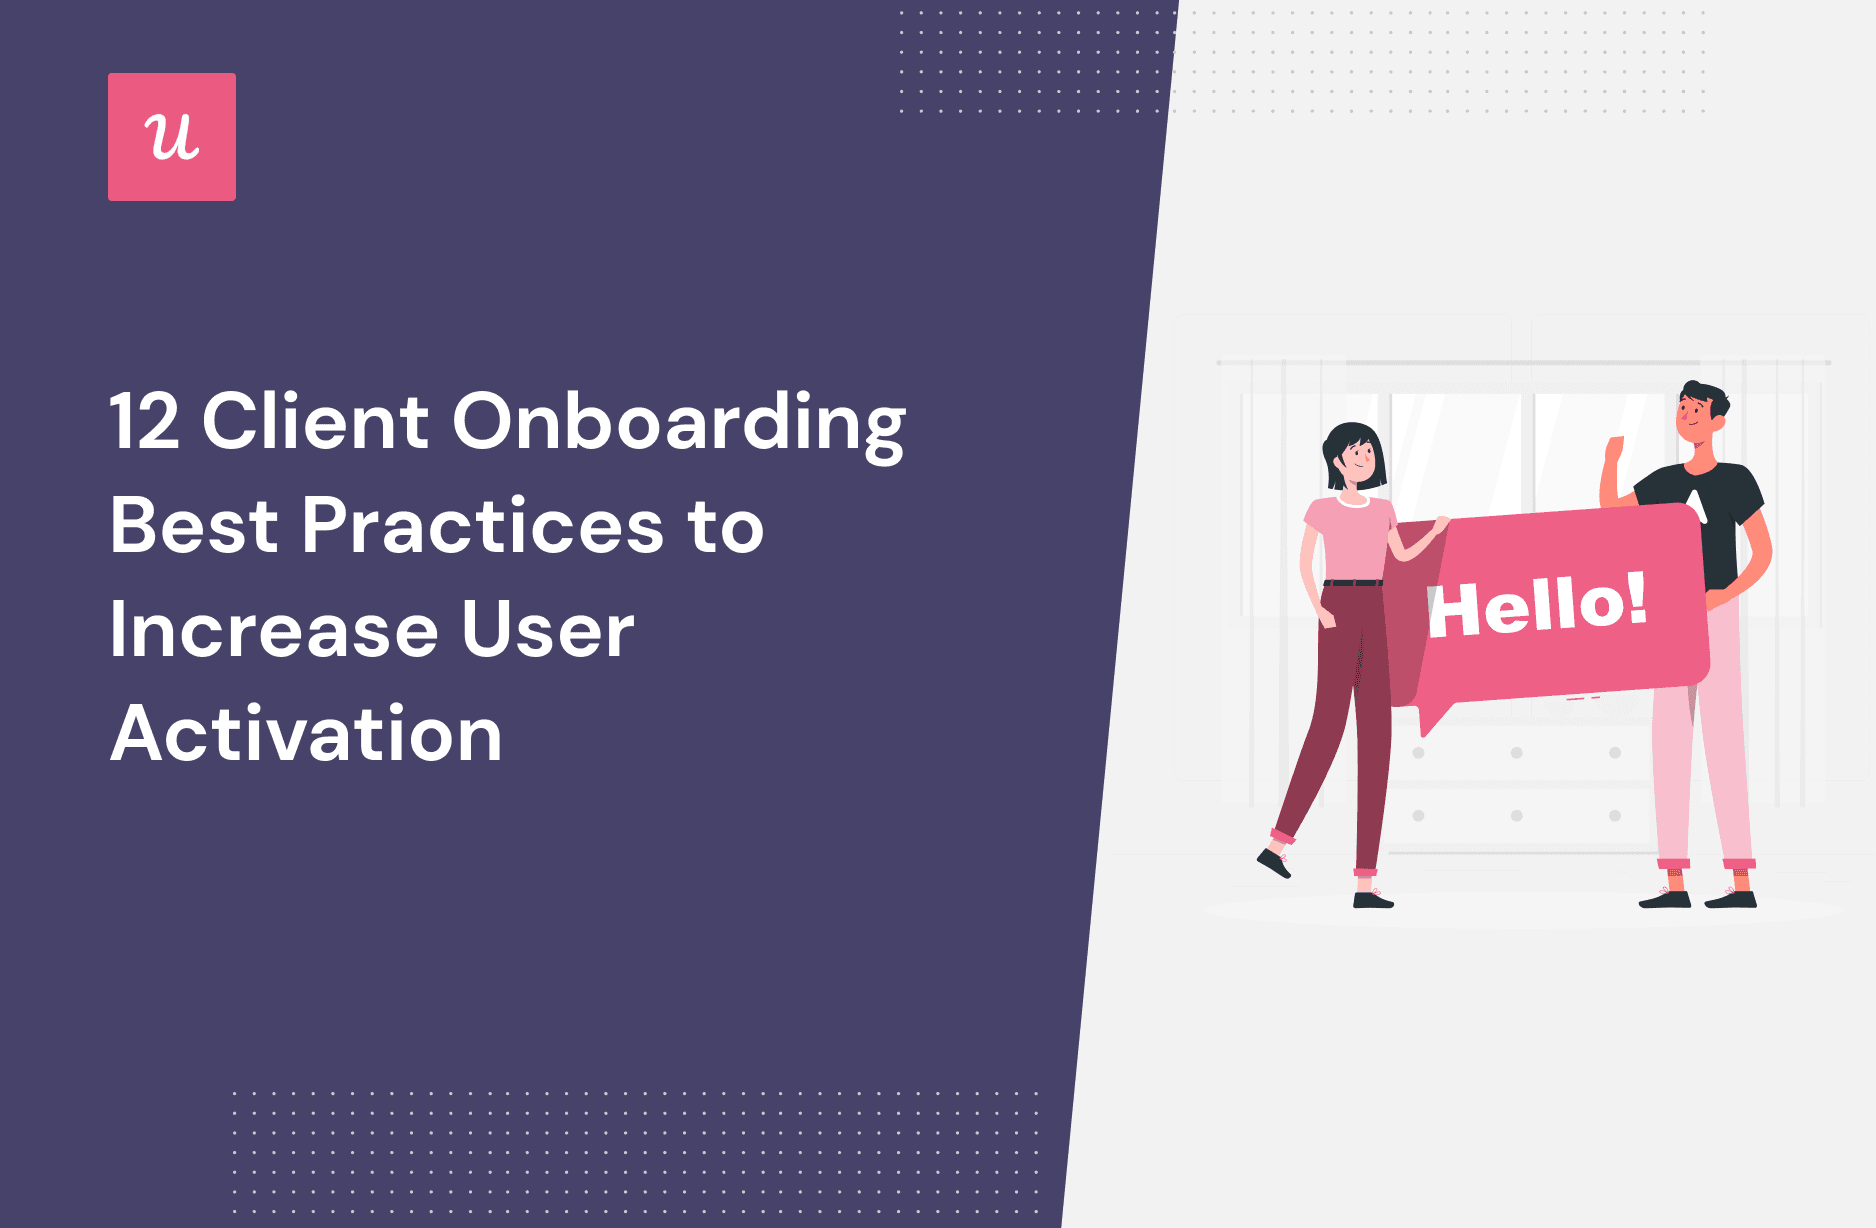 12 Client Onboarding Best Practices to Increase User Activation cover